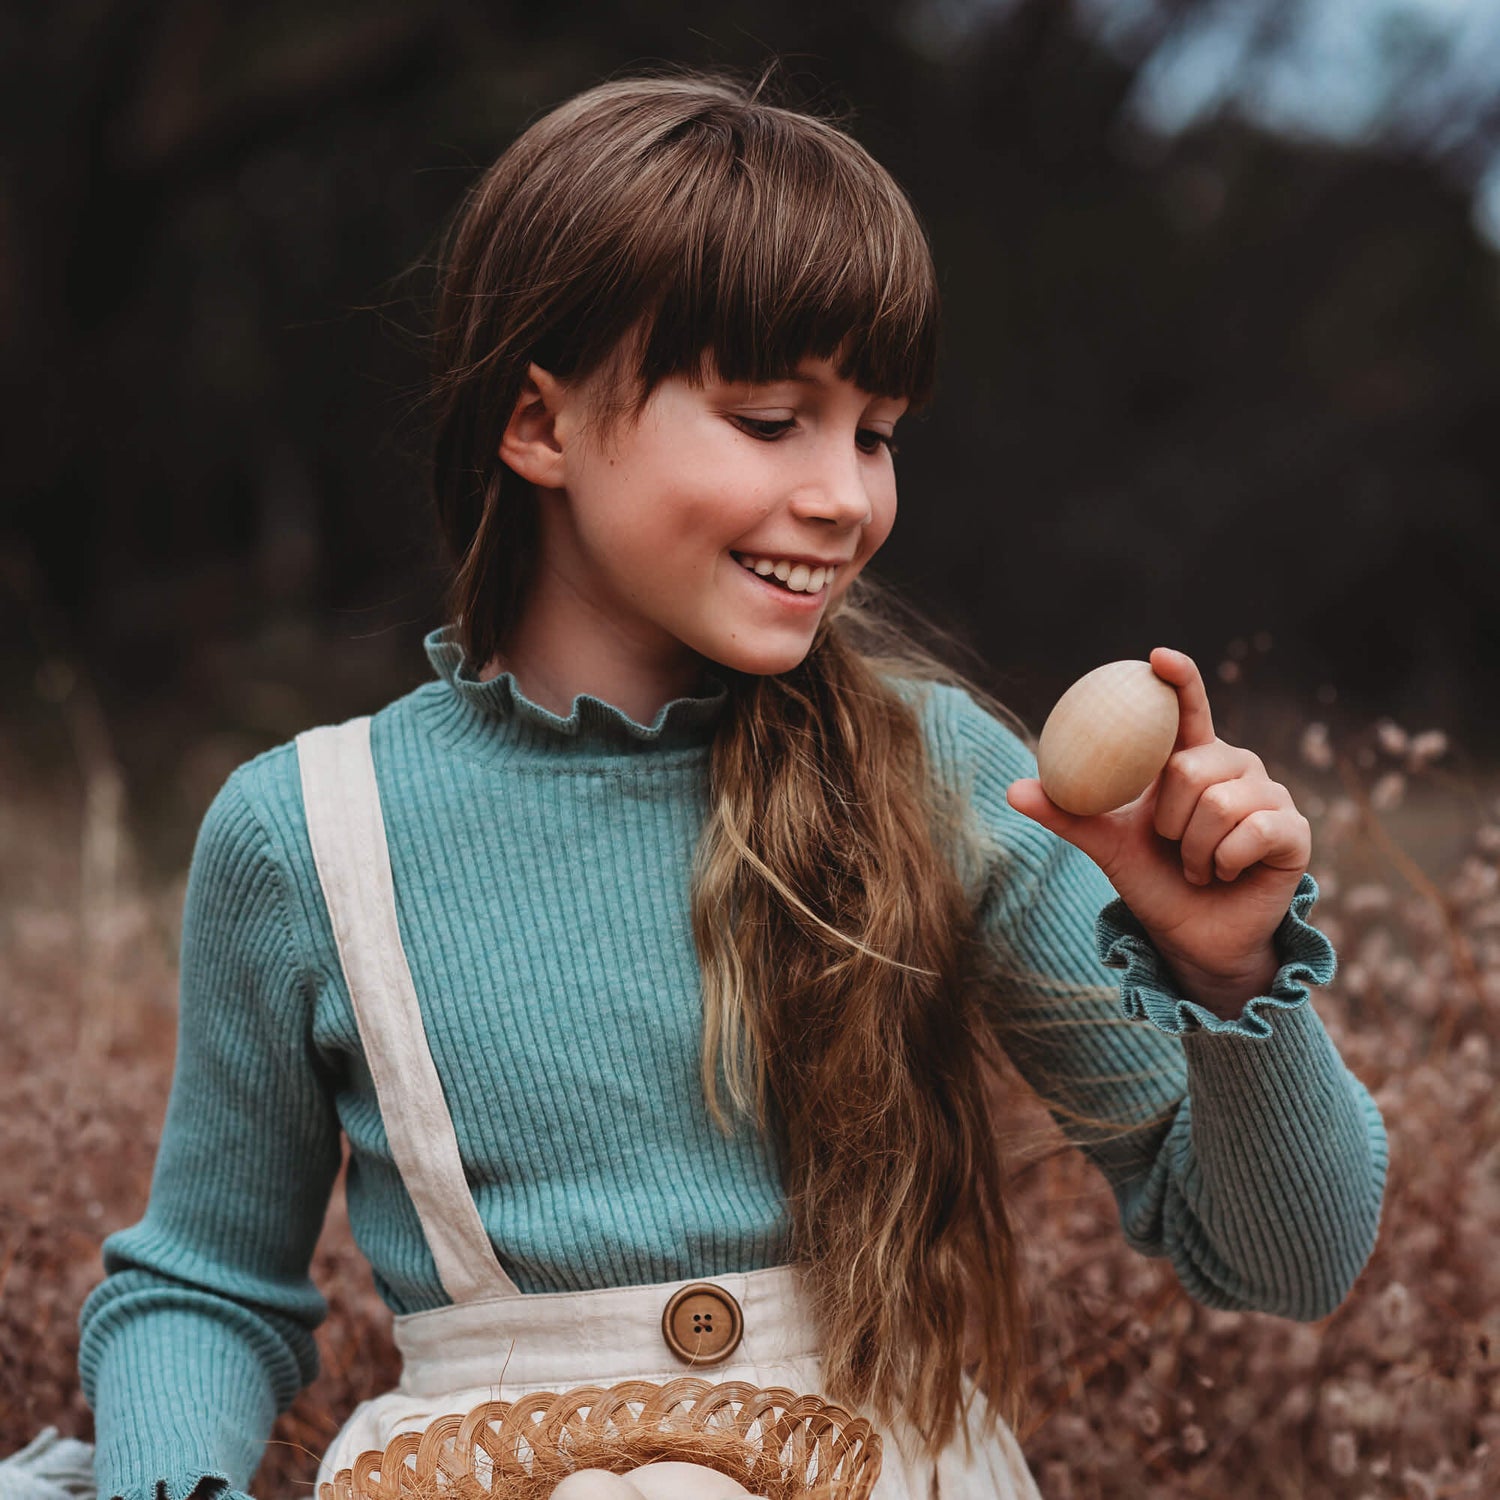 Girl holding large wooden egg for craft sugar free alternative to Easter eggs made by Your Wild Books